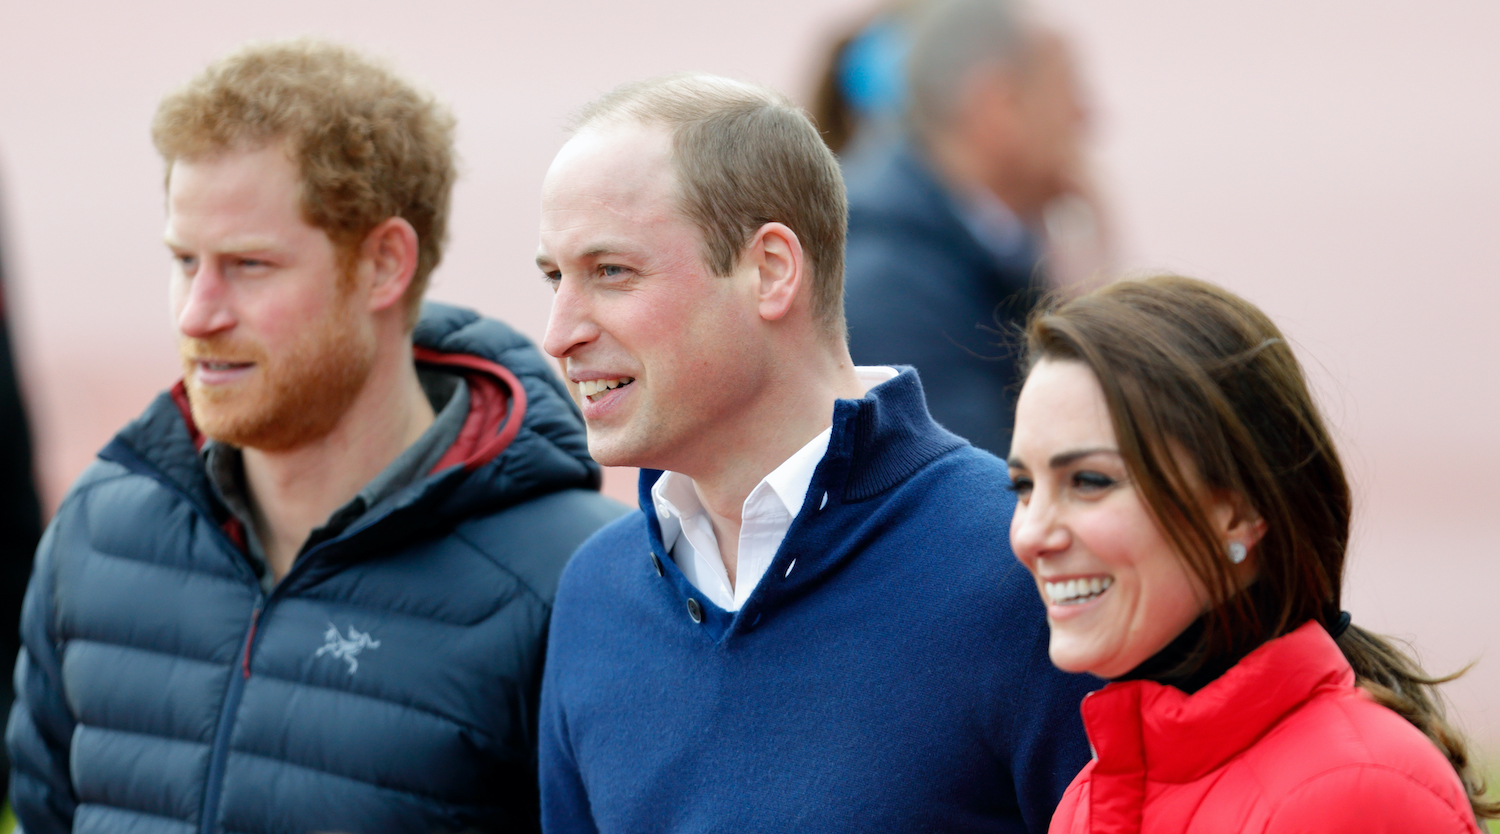 Prince Harry, Prince William, and Kate Middleton join a Team Heads Together London Marathon Training Day at the Queen Elizabeth Olympic Park on February 5, 2017